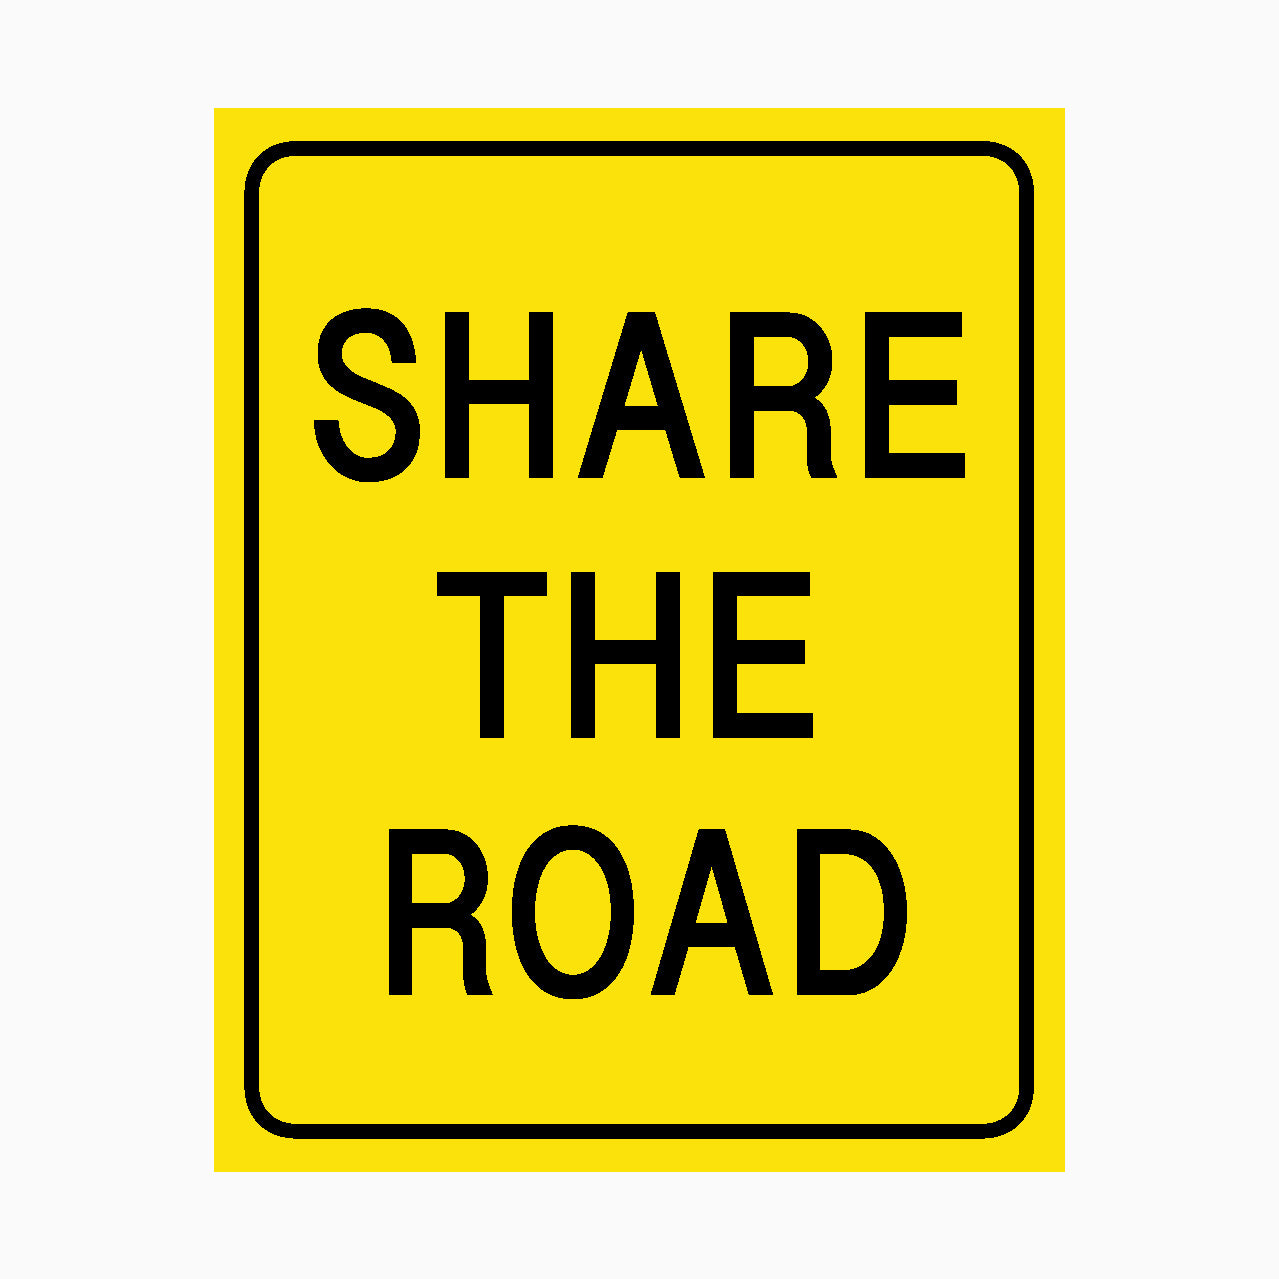 SHARE THE ROAD SIGN - TRAFFIC SIGN